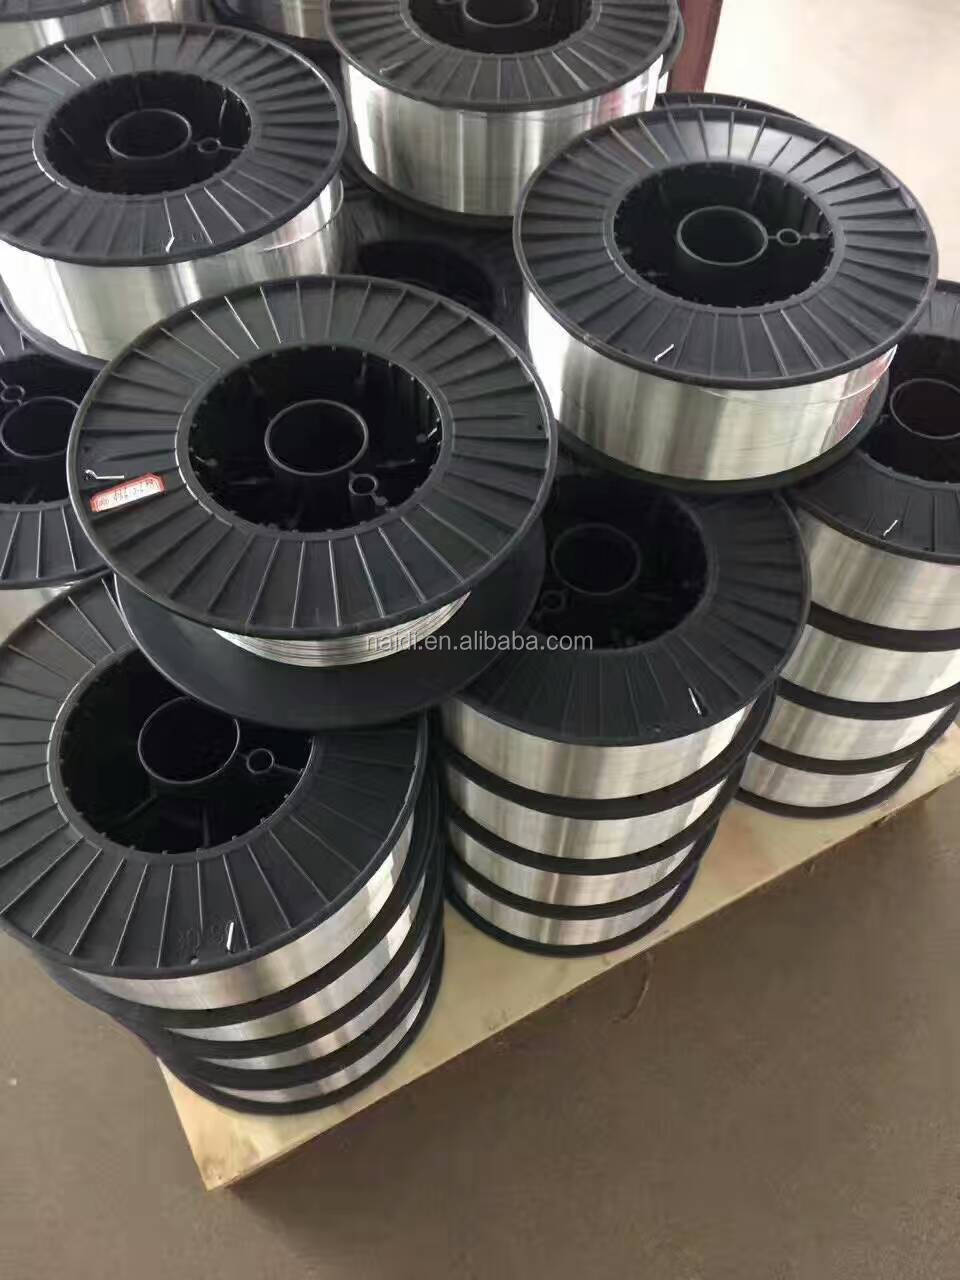 mig welding wire 1.2mm aws a5.9 er410nimo for hydropower stations